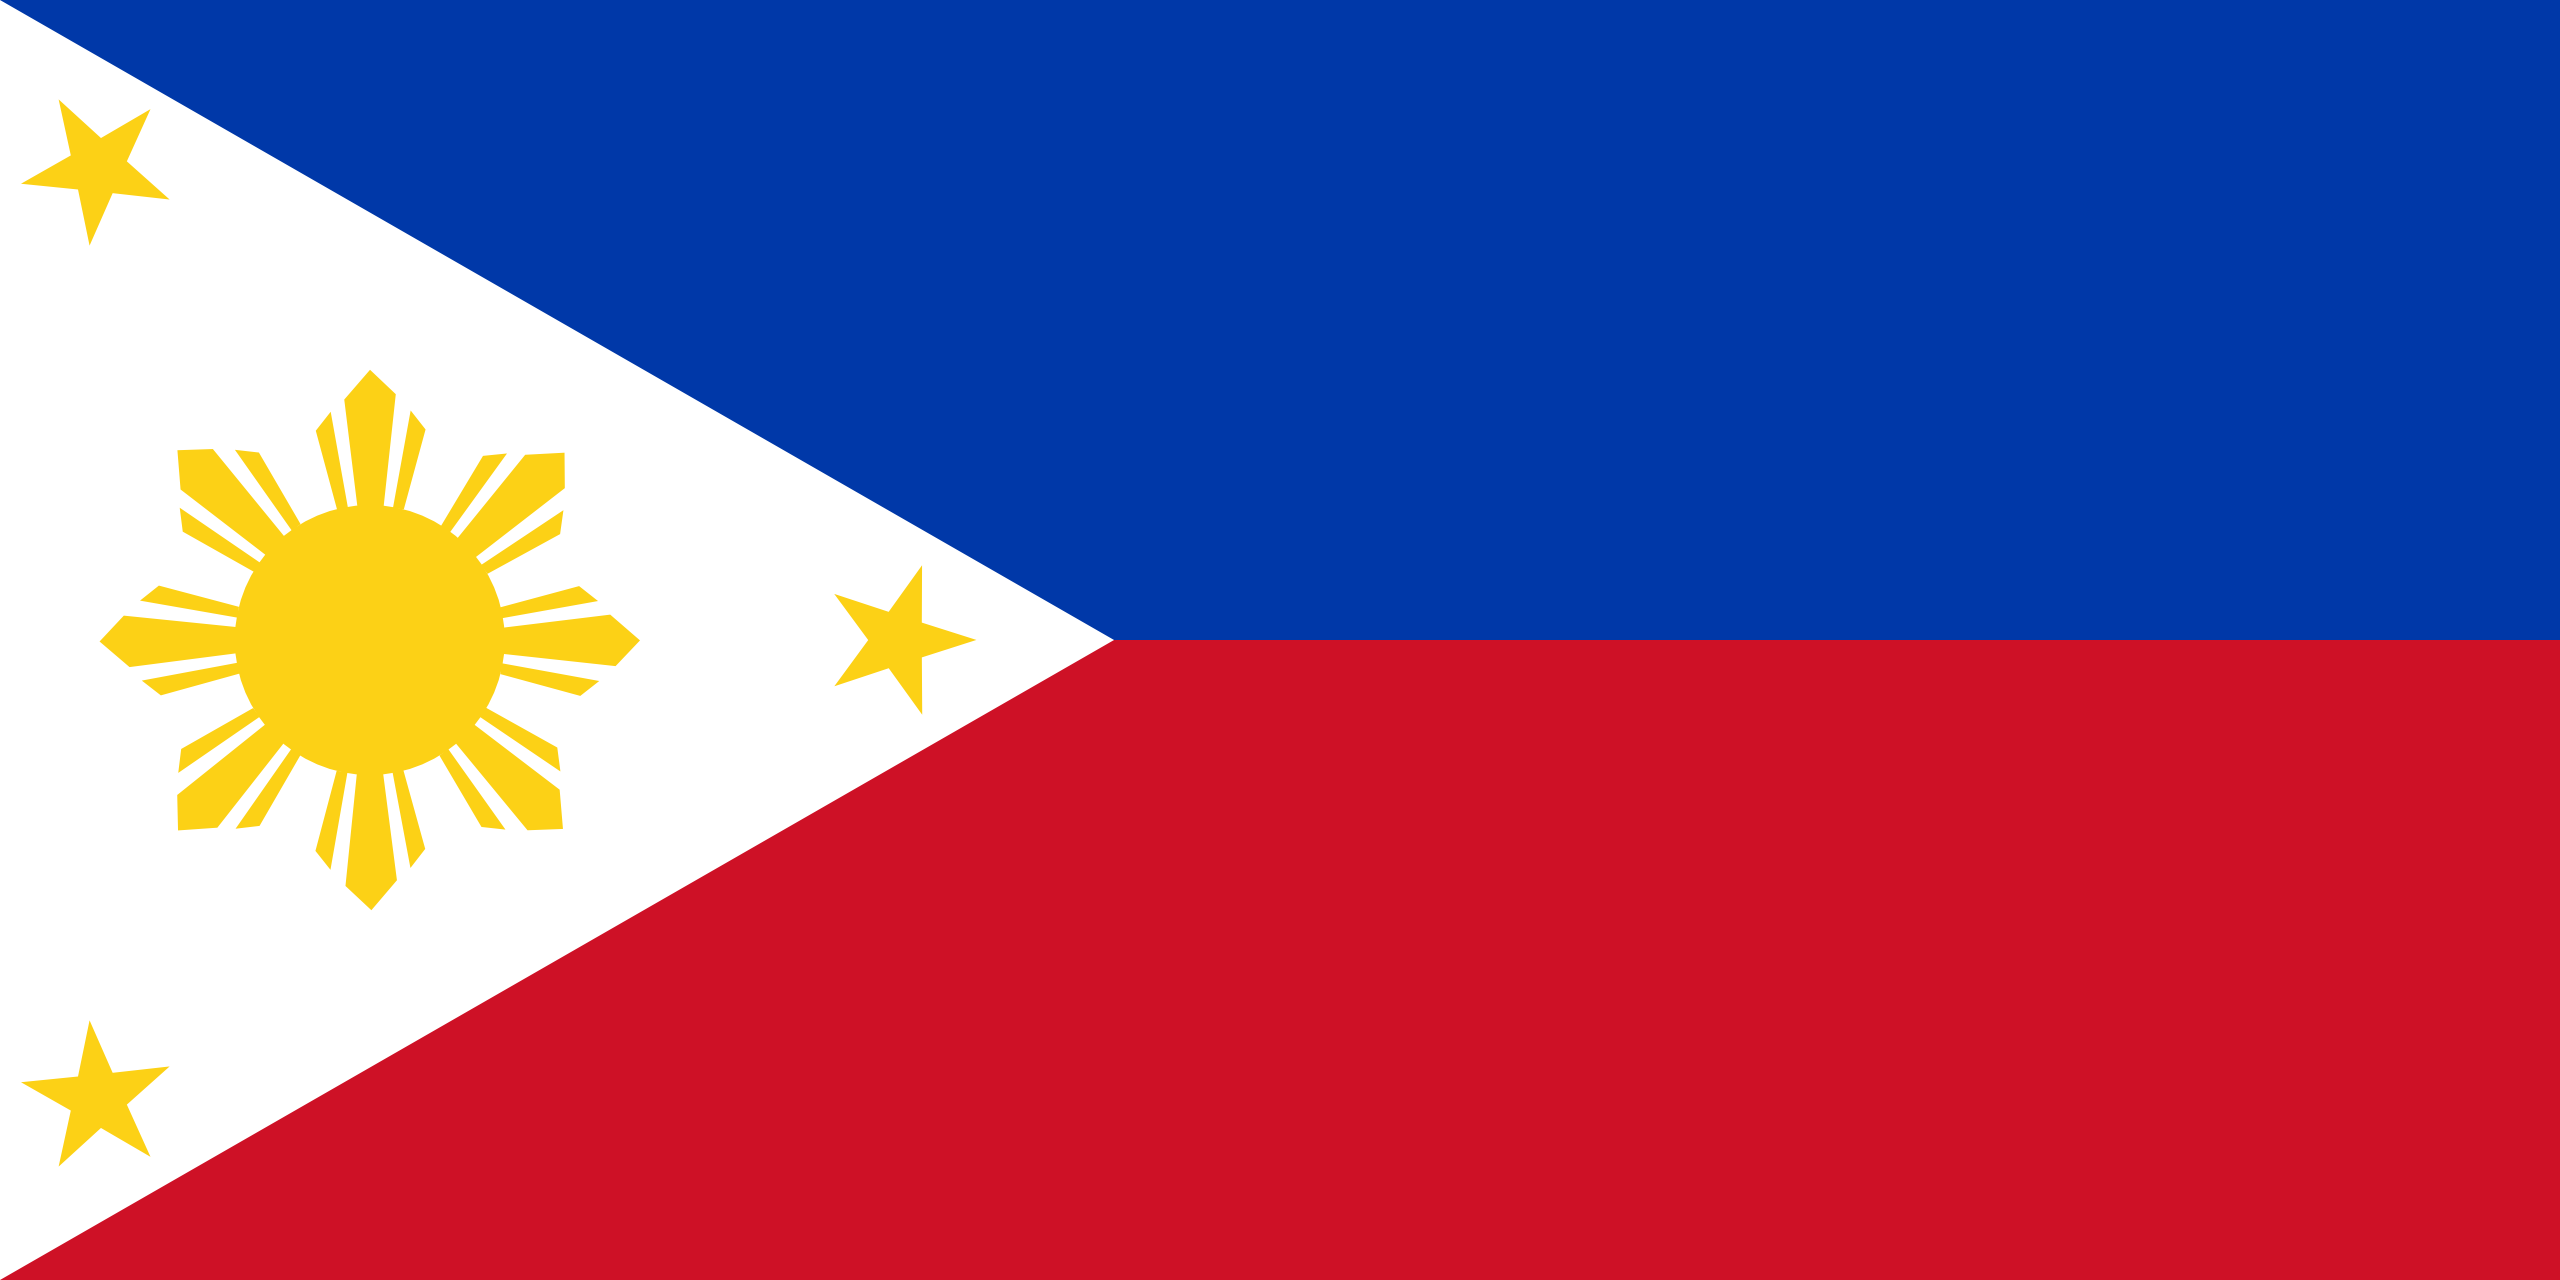 Philippines | Flags of countries